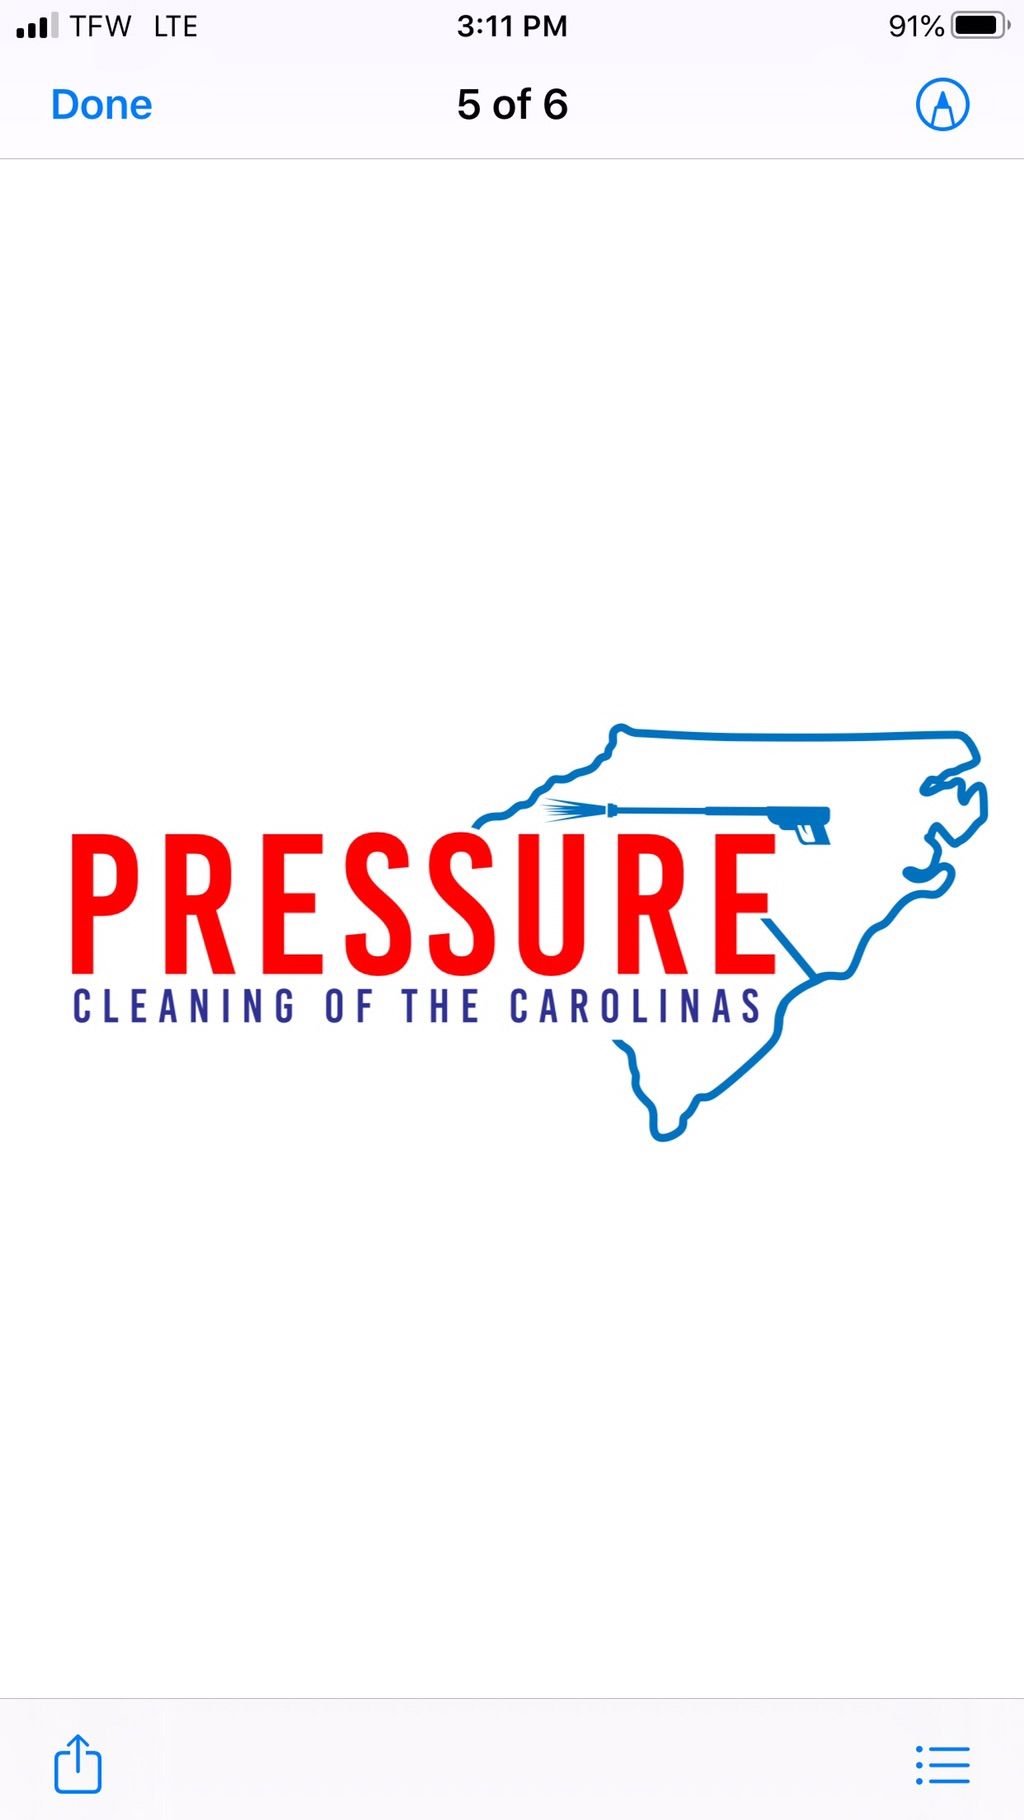 Pressure Cleaning of the Carolinas